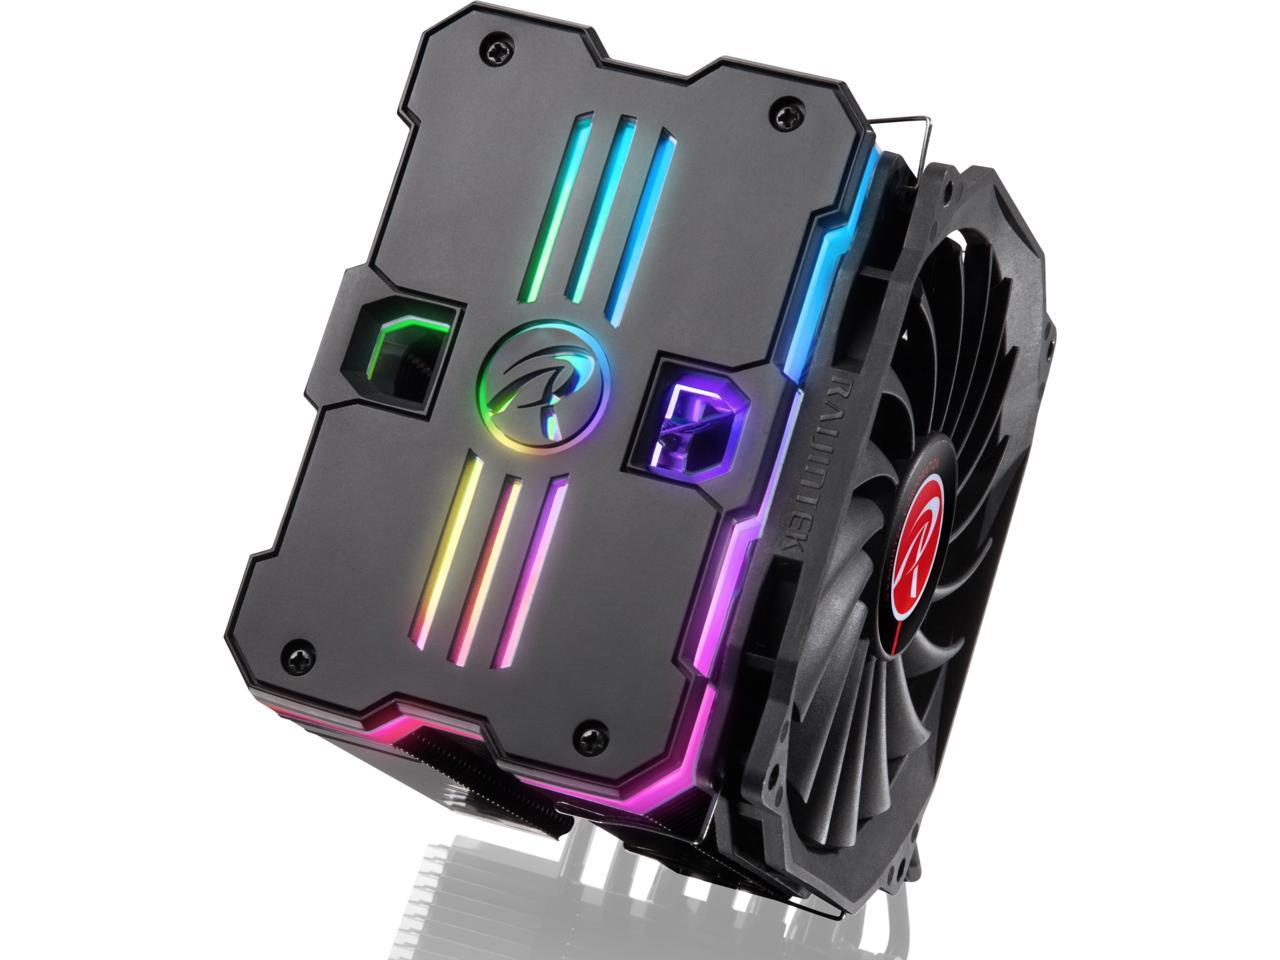 MYA RBW, CPU cooler with Addressable LED panel, 6*6mm heat-pipe, 12013 PWM fan, Innovation Fin Design for Max. Efficiency and Heat Dissipation, and multiple mounting kits, MYA RBW is your best choice